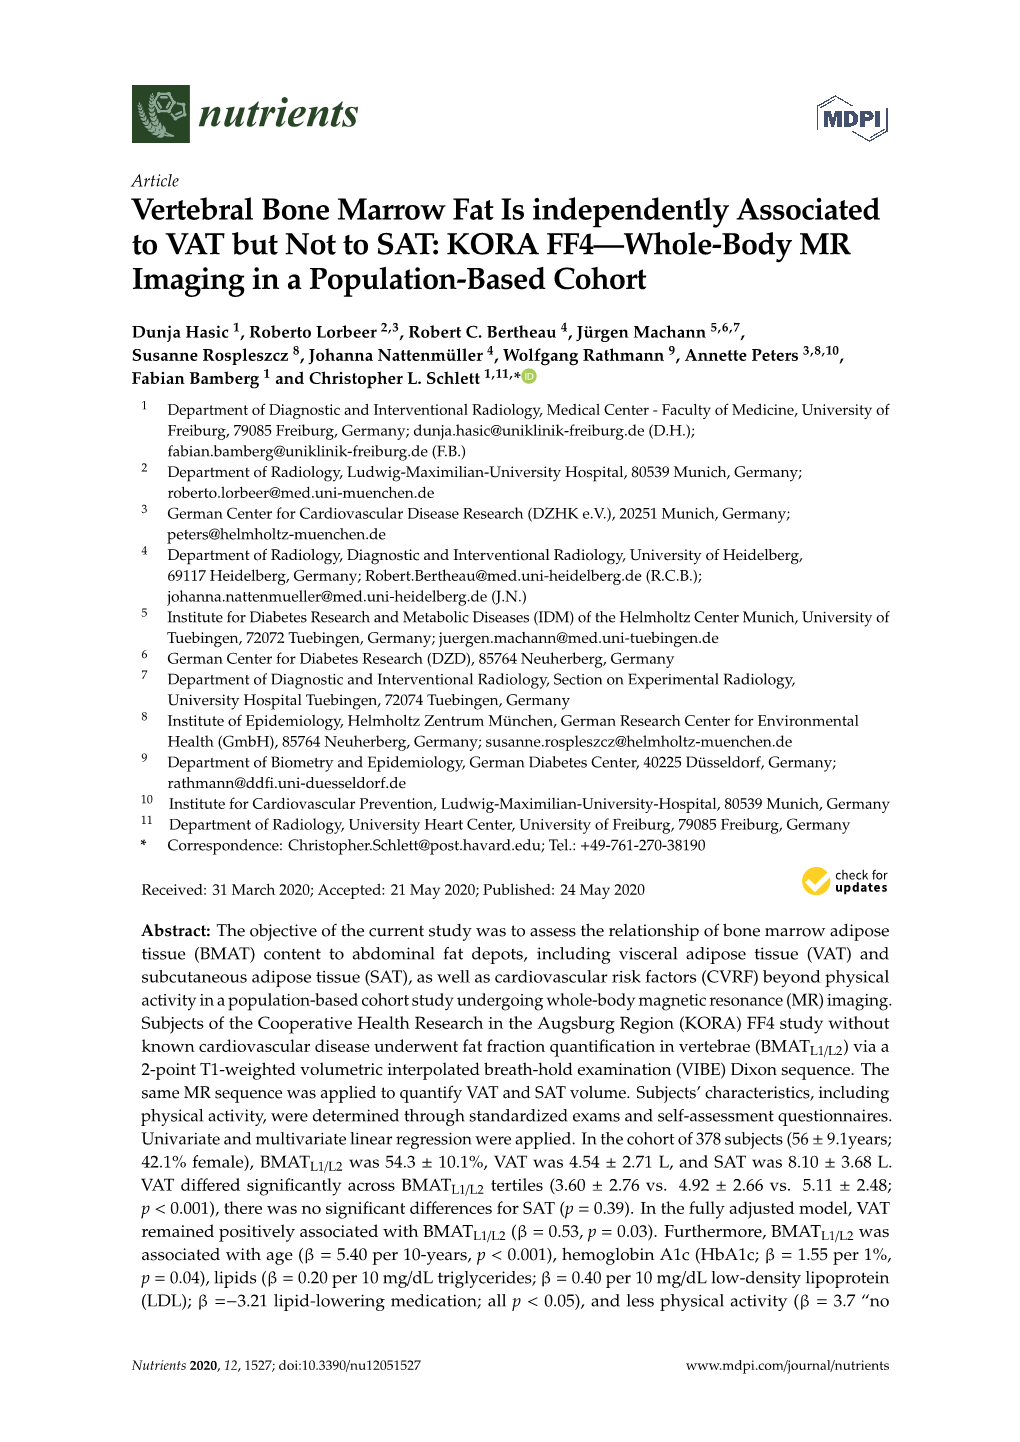 Vertebral Bone Marrow Fat Is Independently Associated to VAT but Not to SAT: KORA FF4—Whole-Body MR Imaging in a Population-Based Cohort